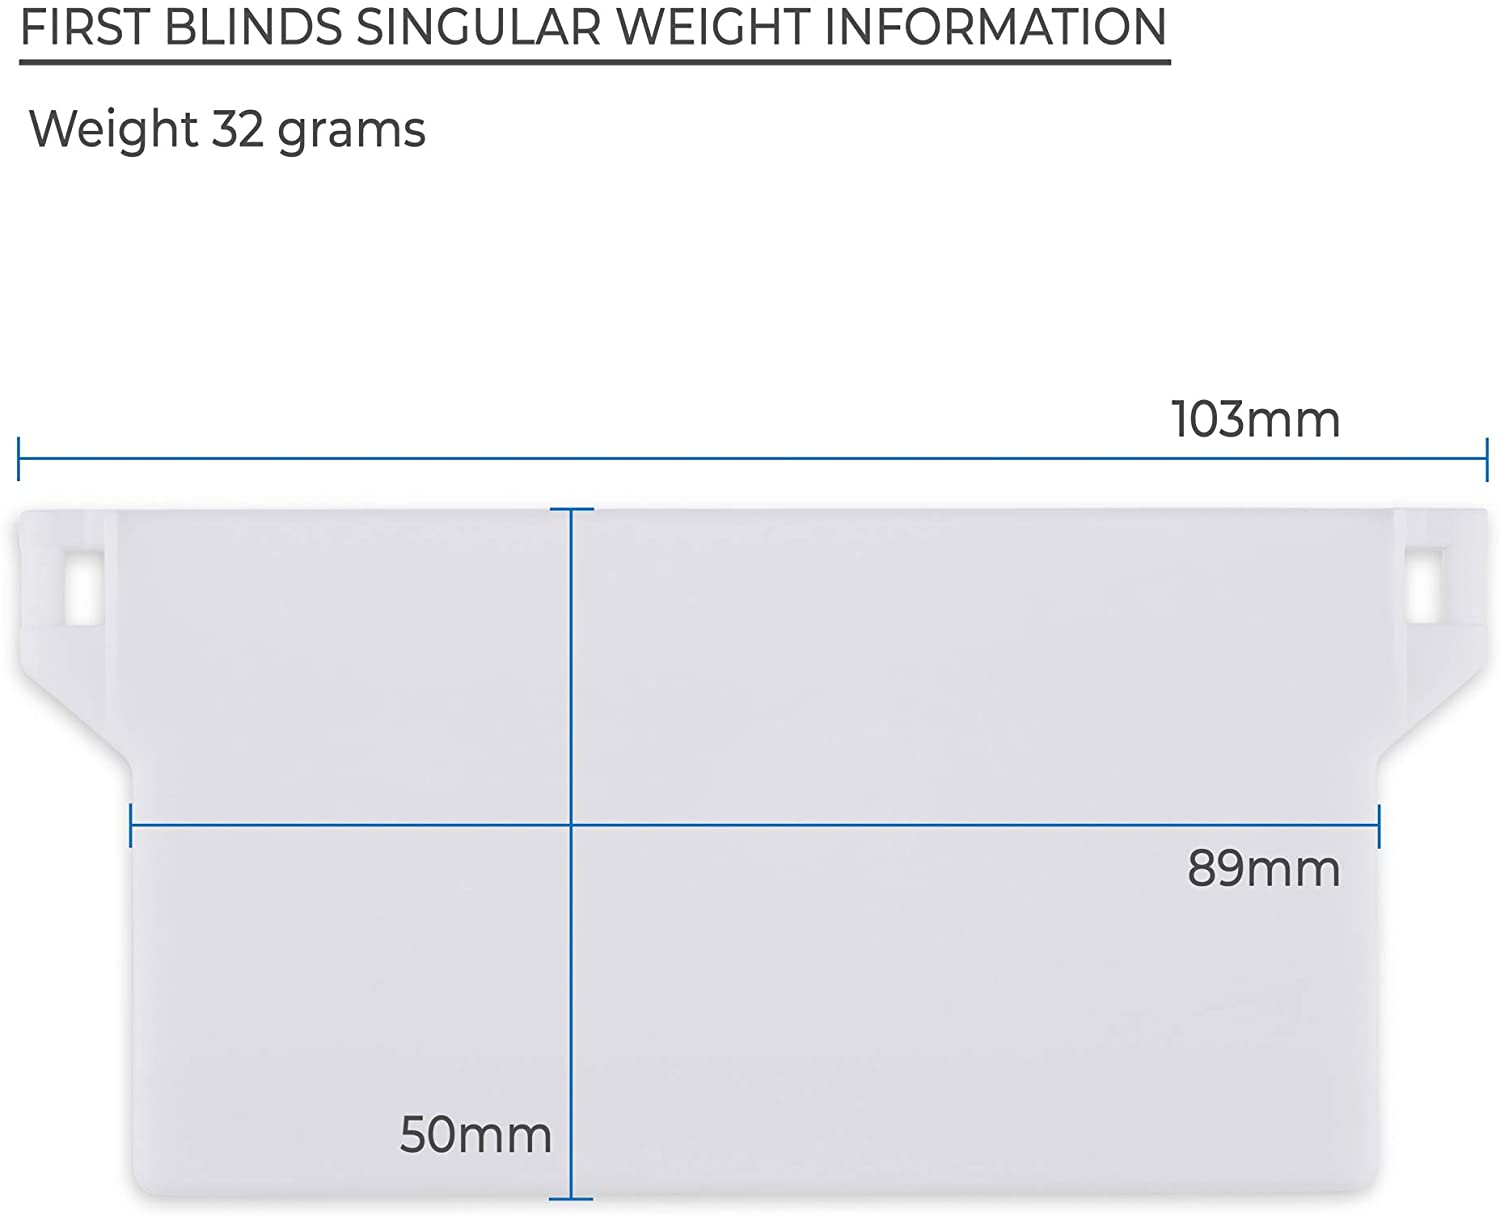 First Blinds 30-Piece Vertical Blind Set Replacement Spares: Bottom Weights and 6 Meter Chain, 89mm (3.5 Inches) 5